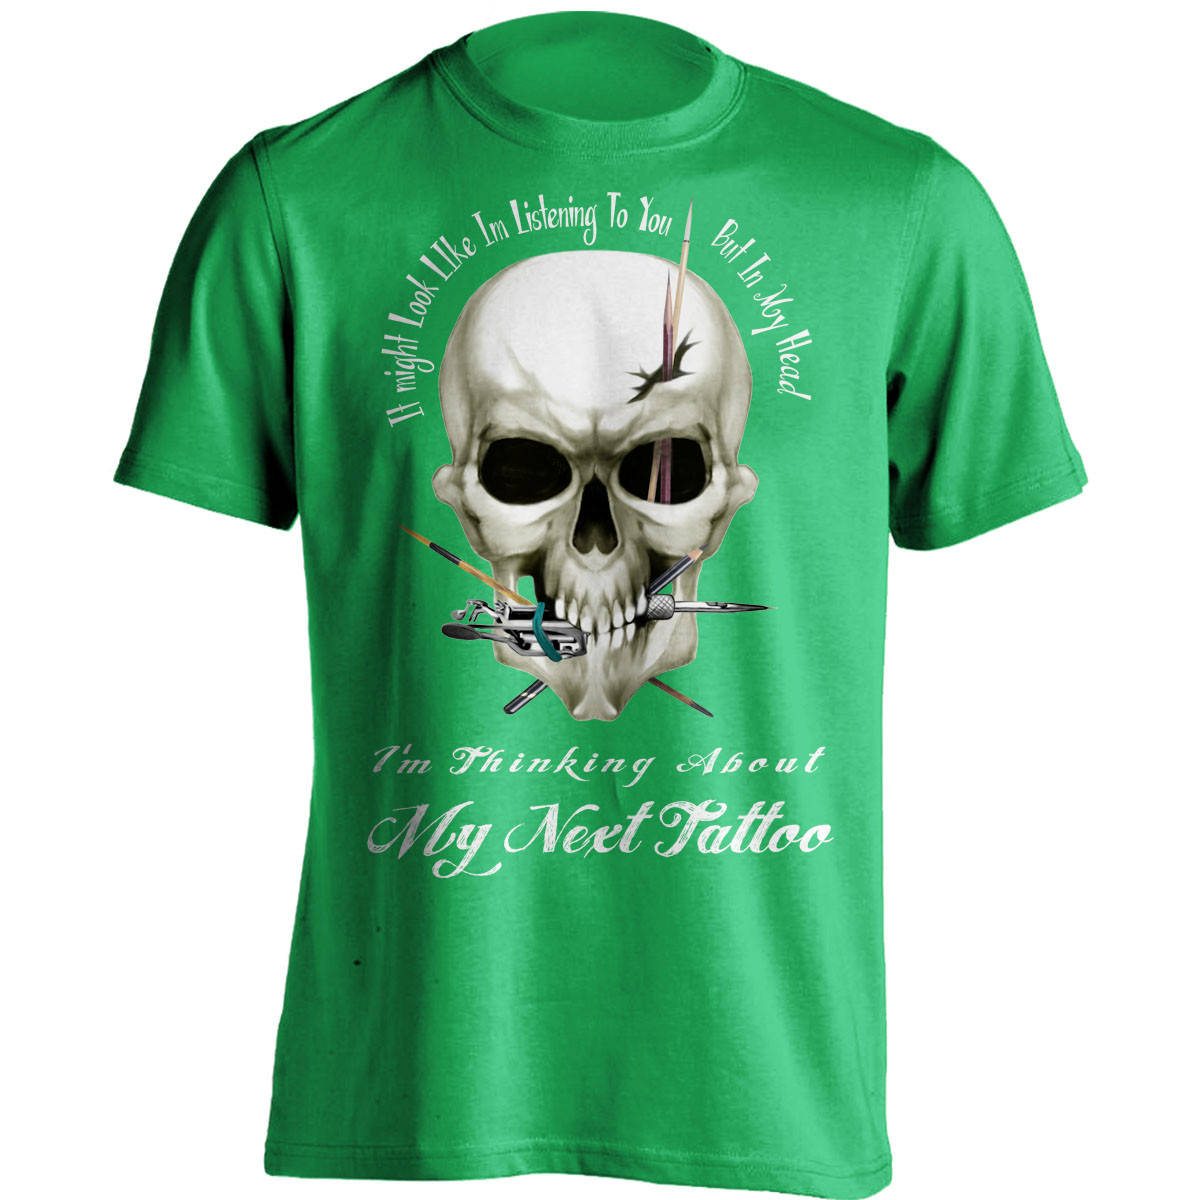 "I Might Look Like Im Listening To You" Tattoo Lovers T-Shirt